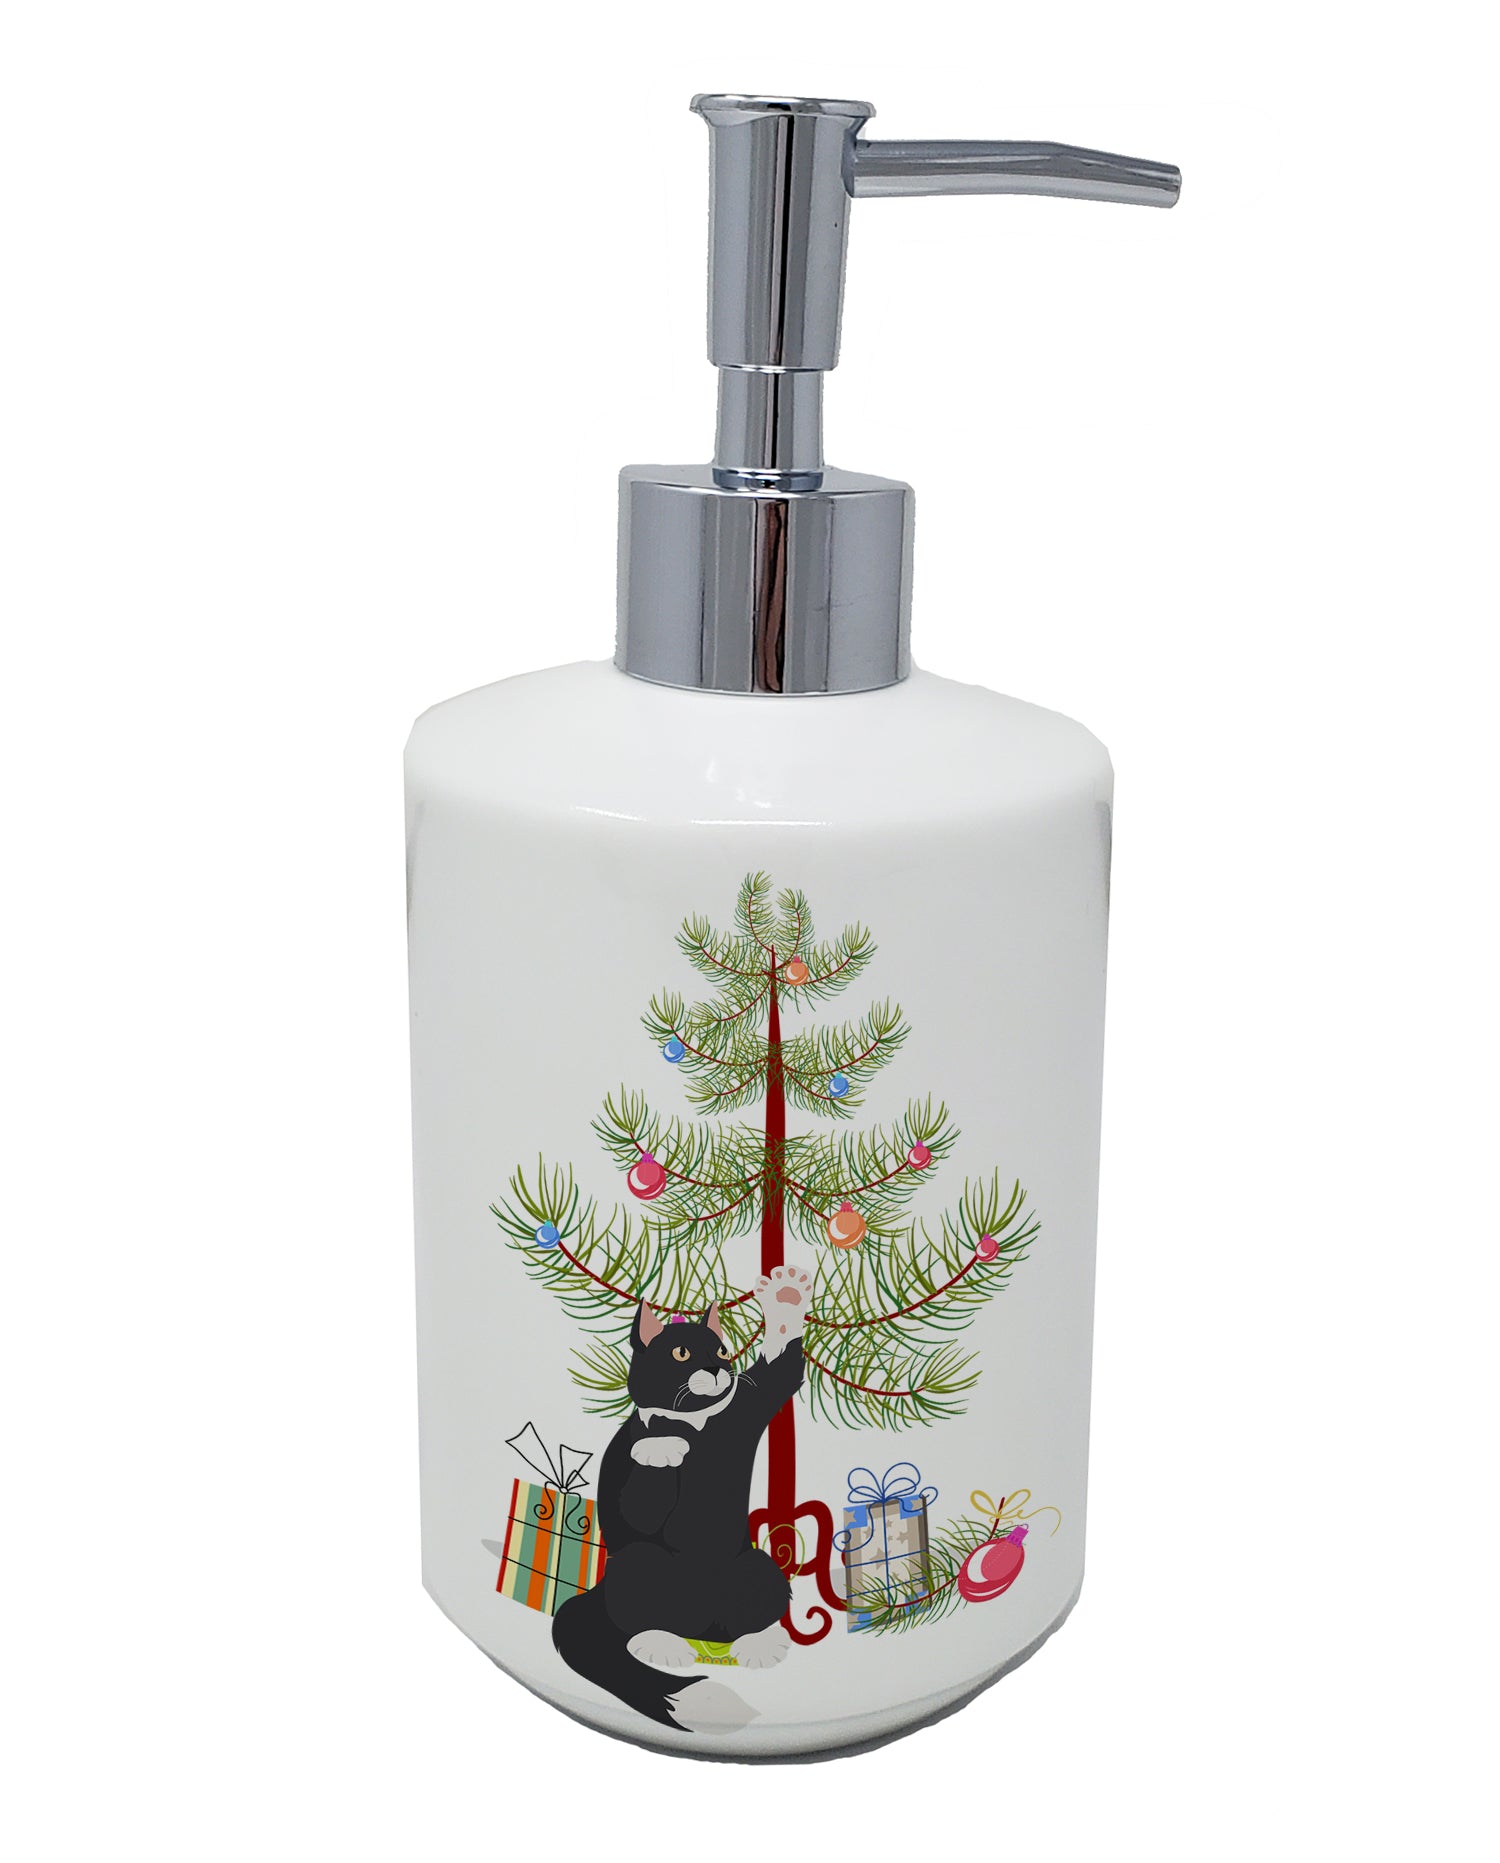 Buy this American Polydactyl Cat Merry Christmas Ceramic Soap Dispenser